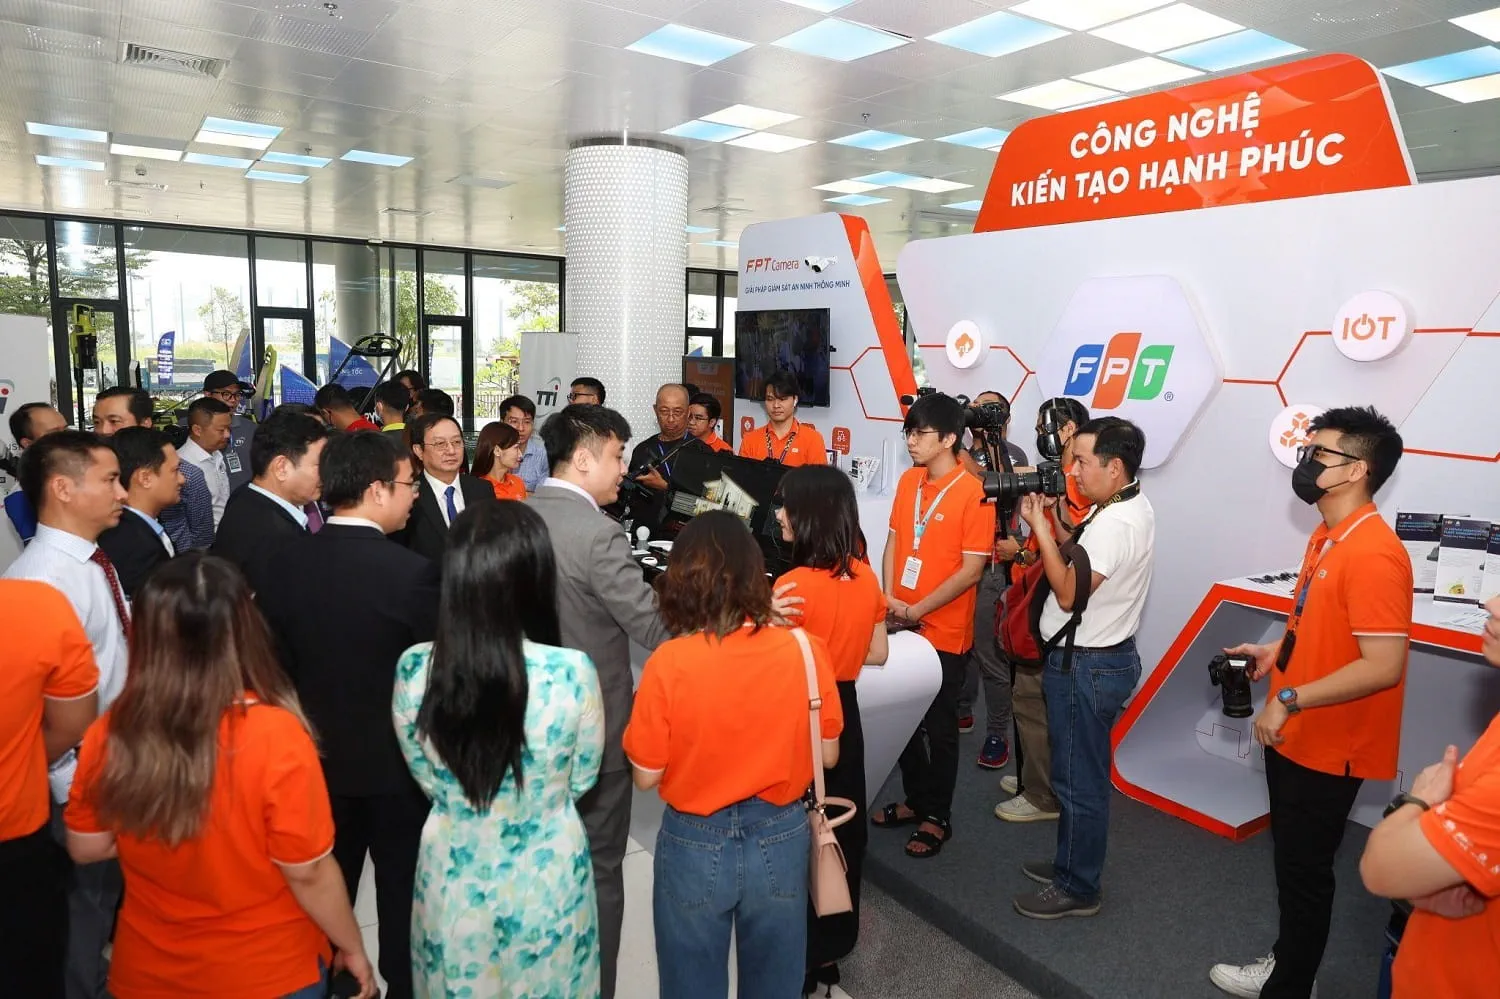 FPT's exhibition booths with the theme "Tech creates more Joy" attract visitors.